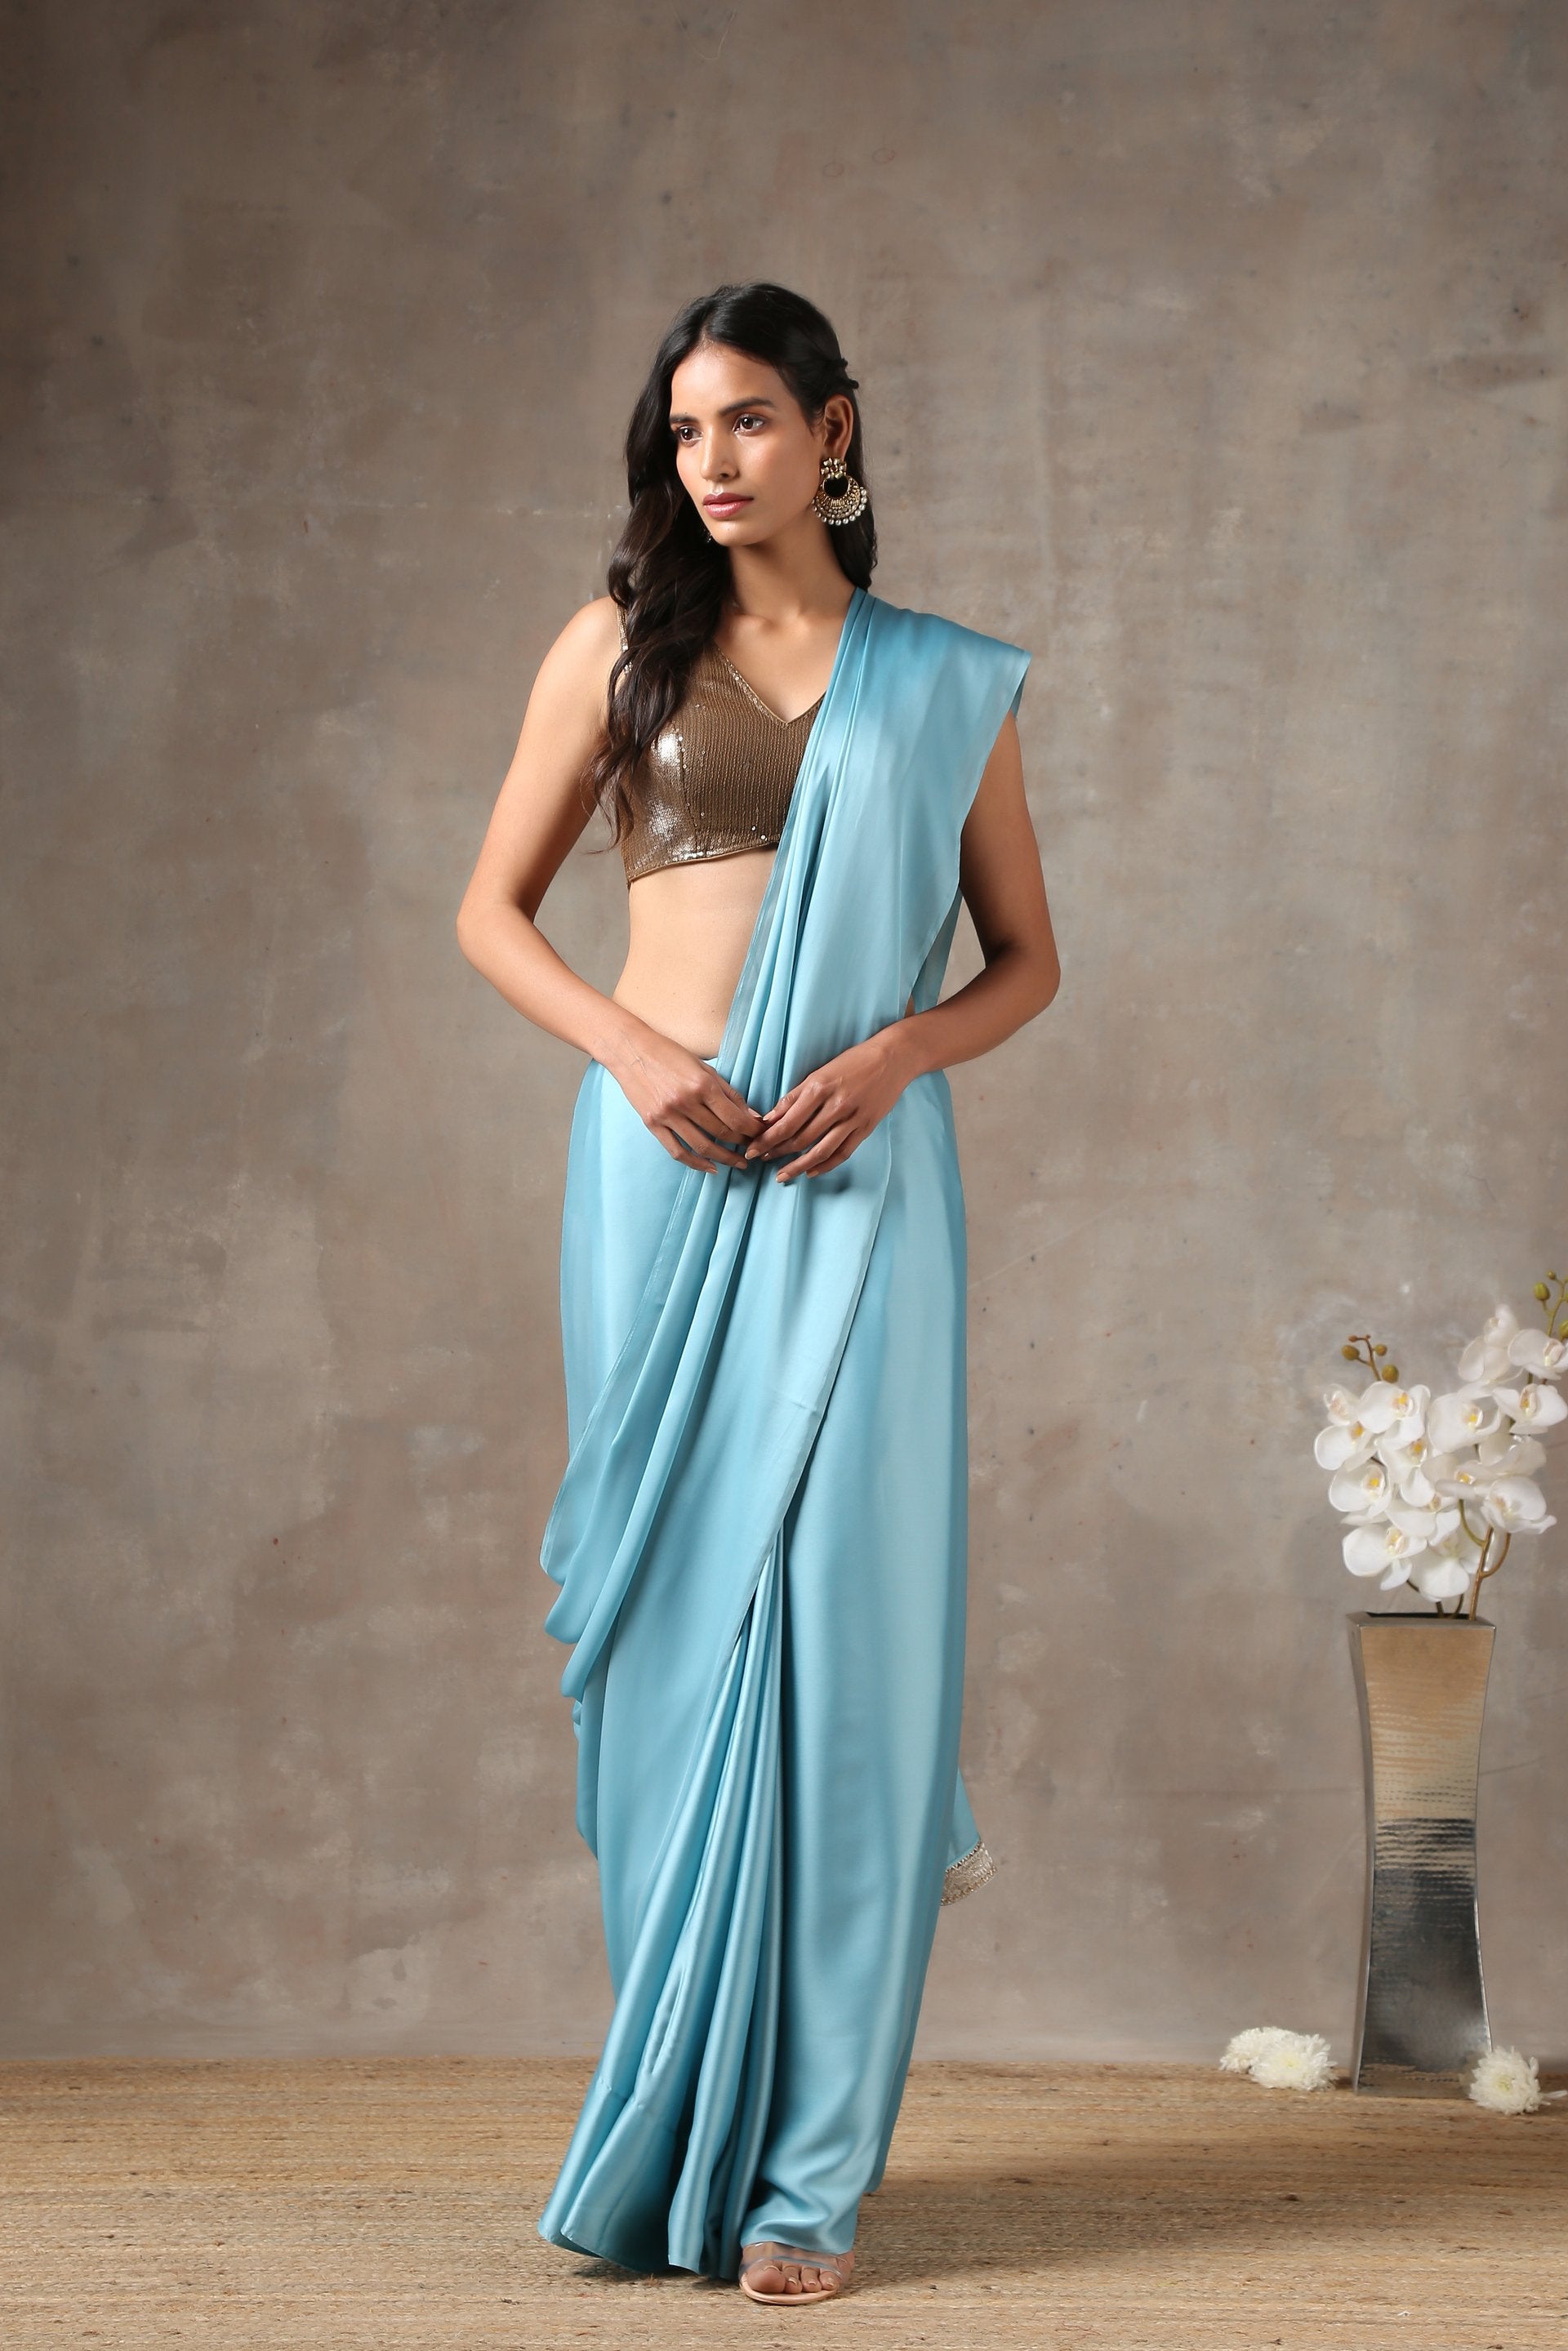 4 Secrets For Looking Slim In Saree Without Losing Any Weight